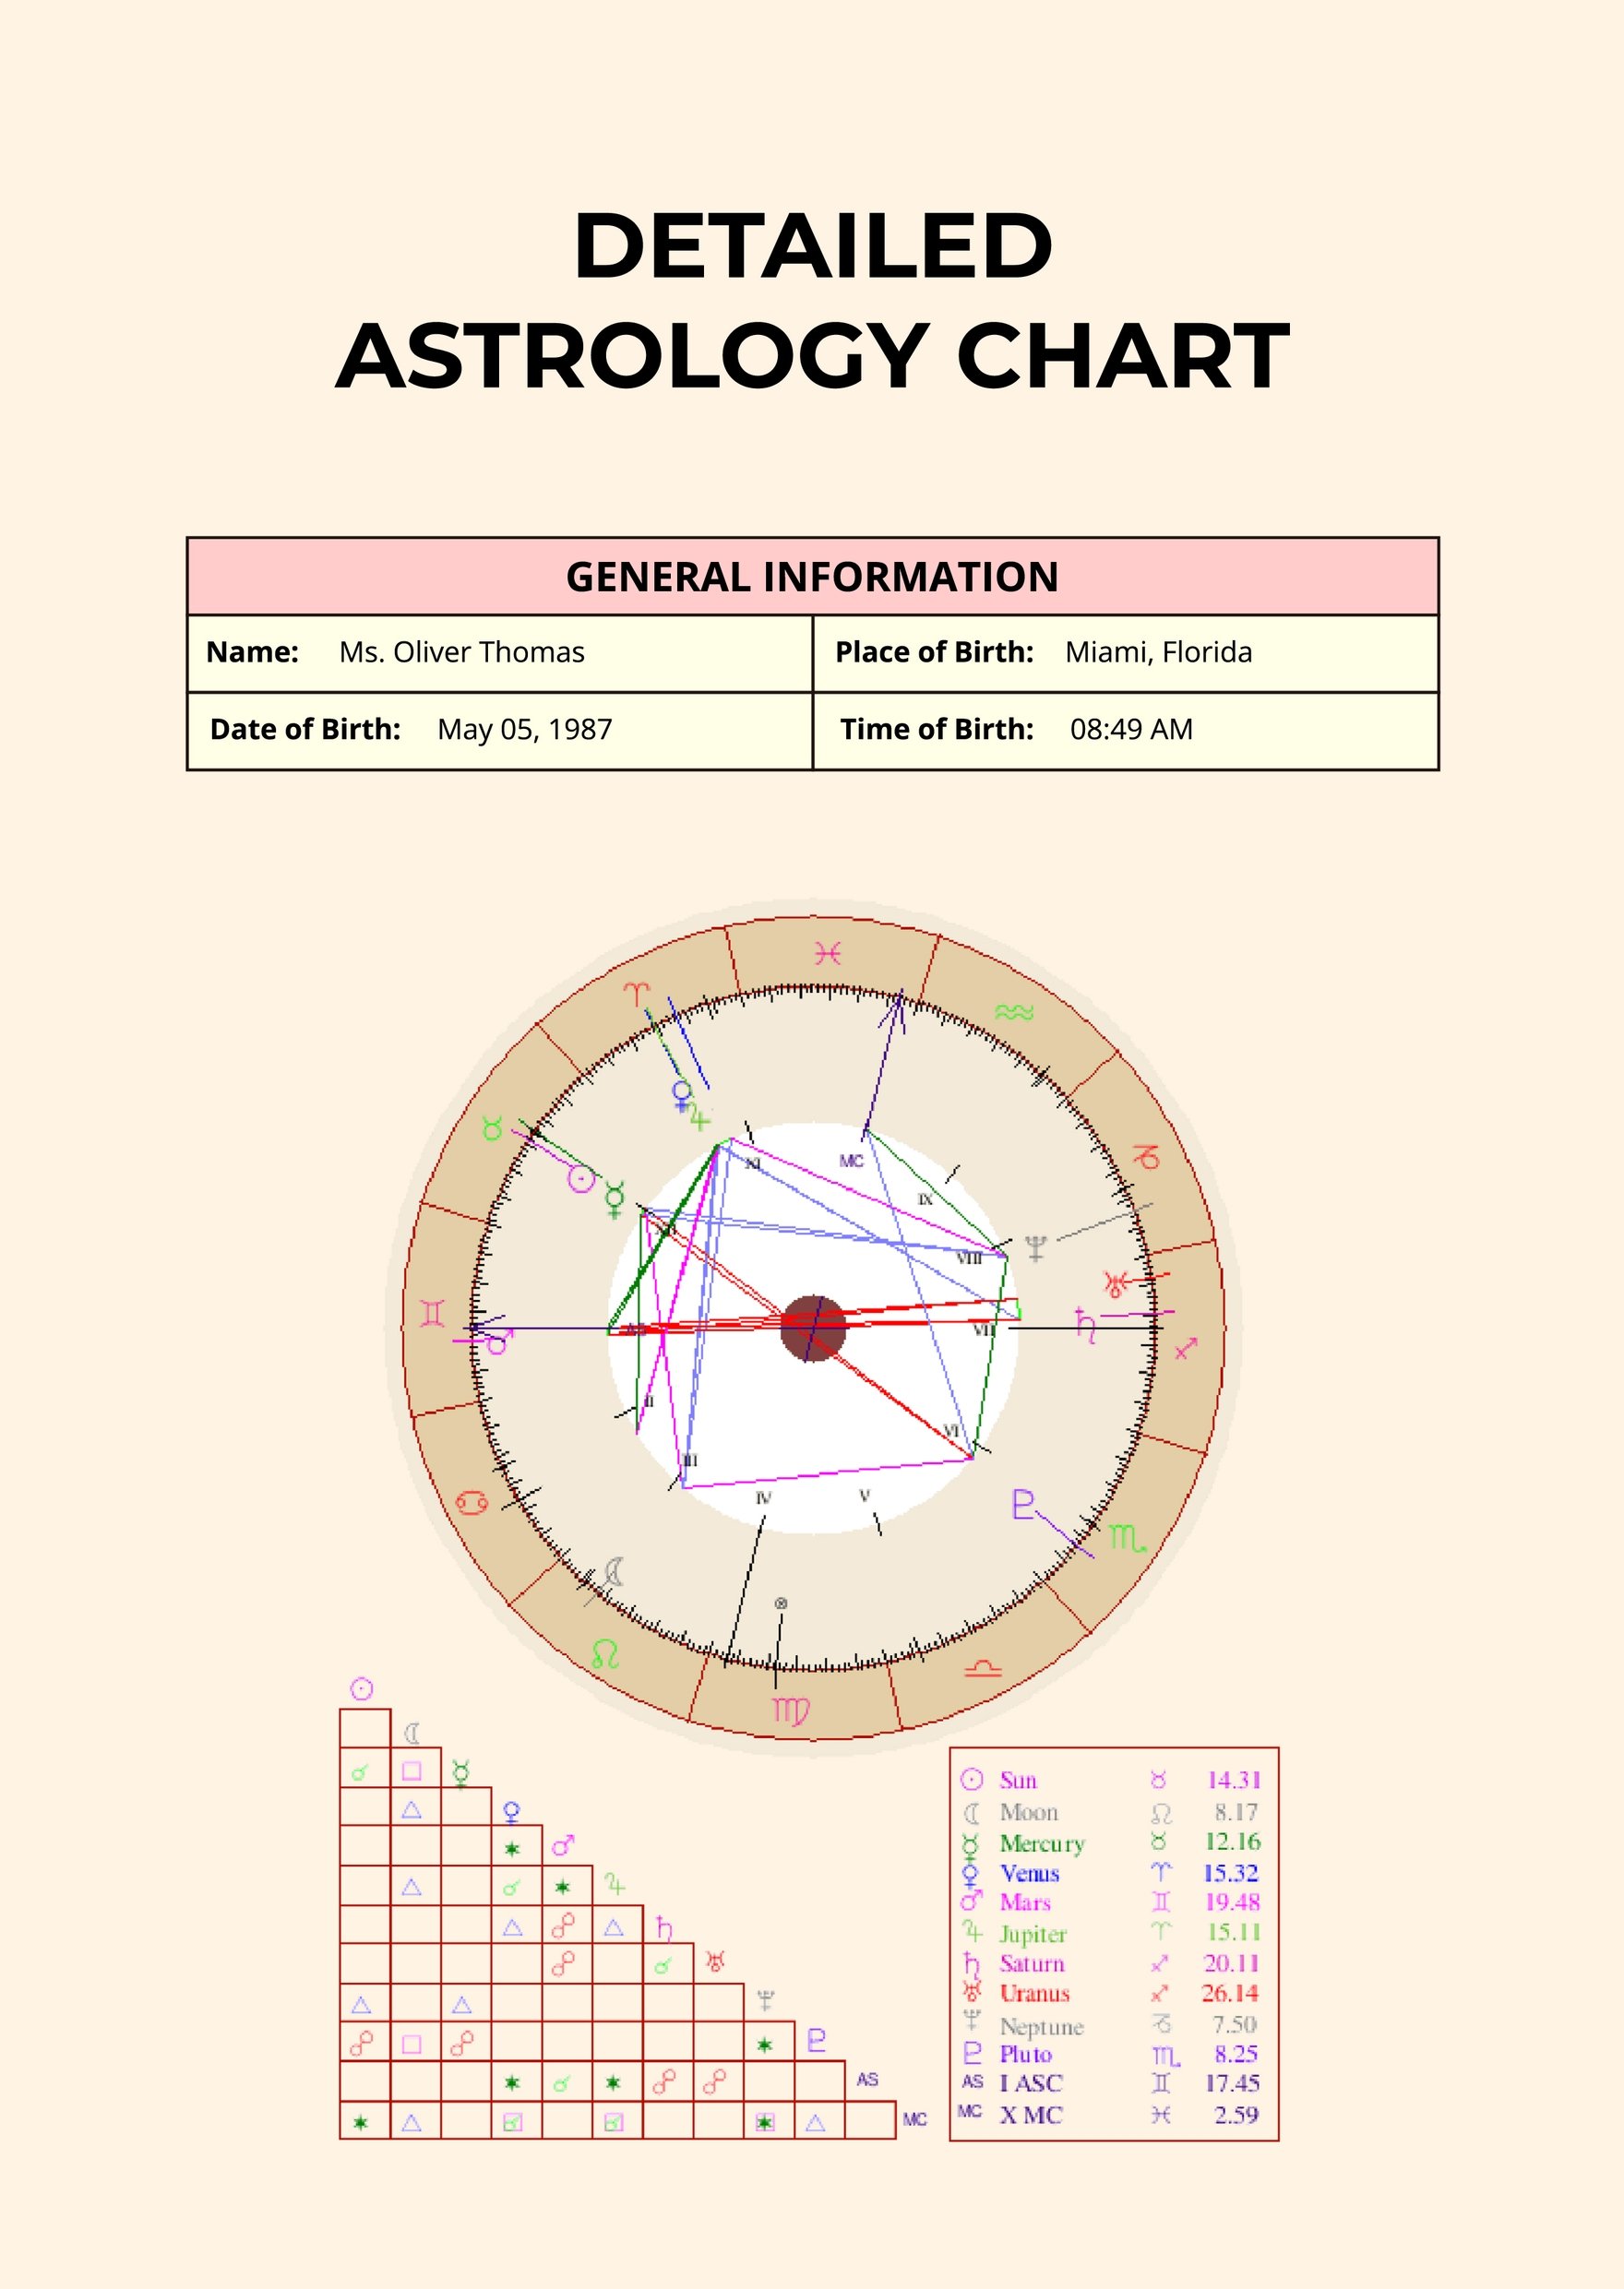 Detailed Astrology Chart Template in PDF, Illustrator